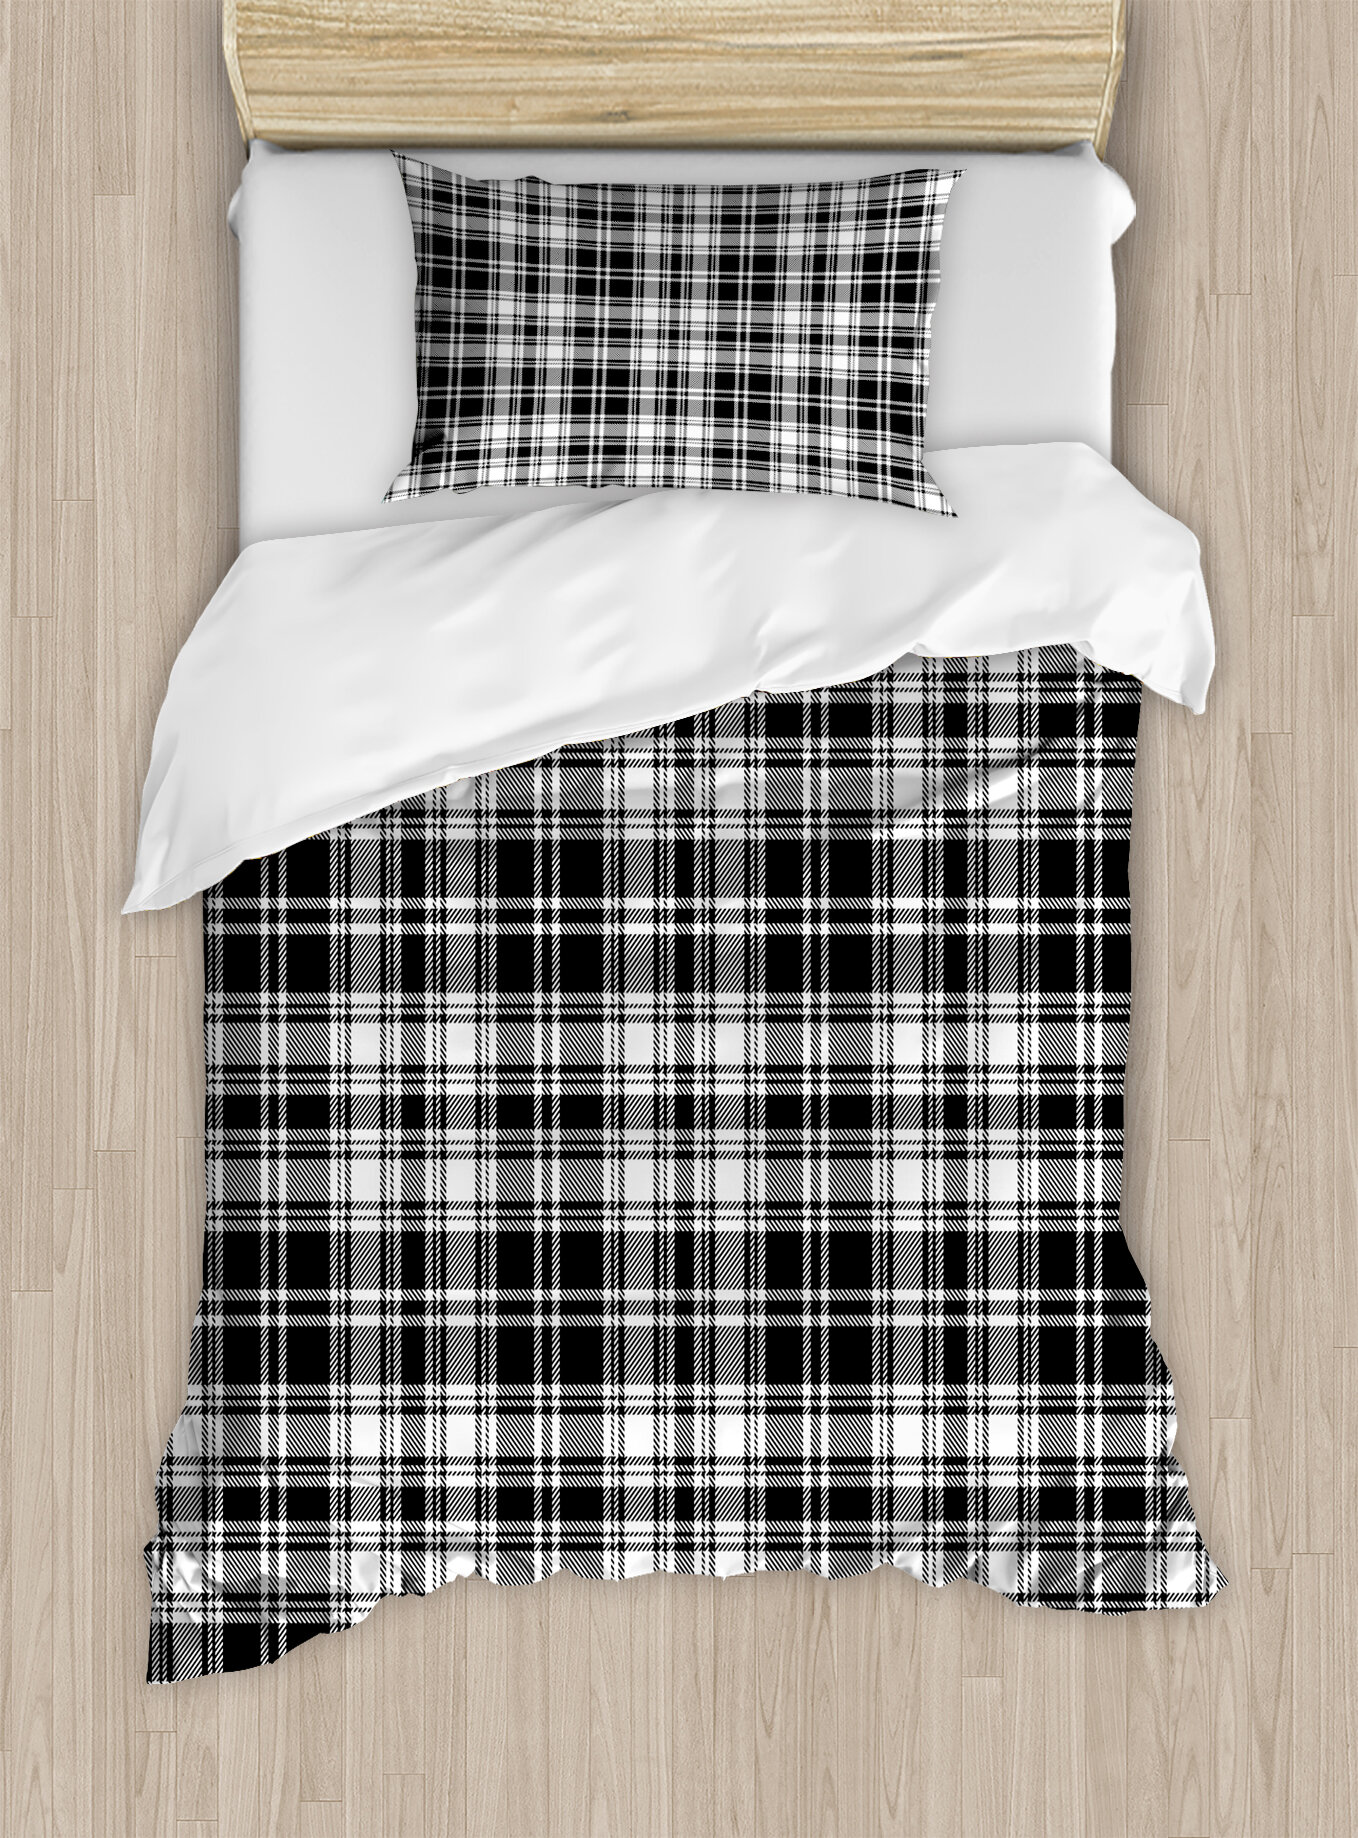 East Urban Home Abstract British Tartan Pattern With Vertical And